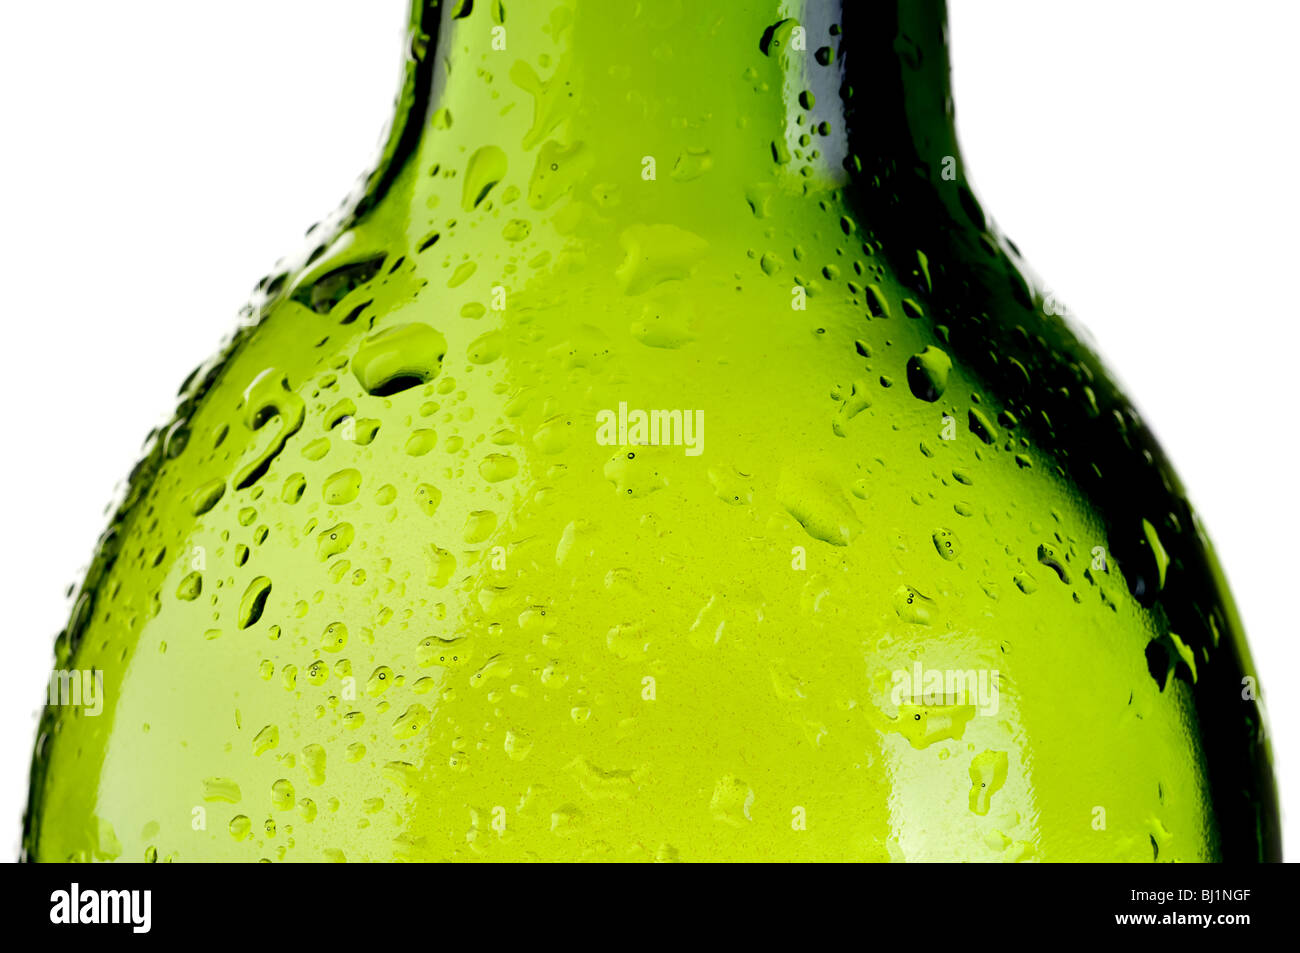 abstract close up of a cold wet green bottle Stock Photo